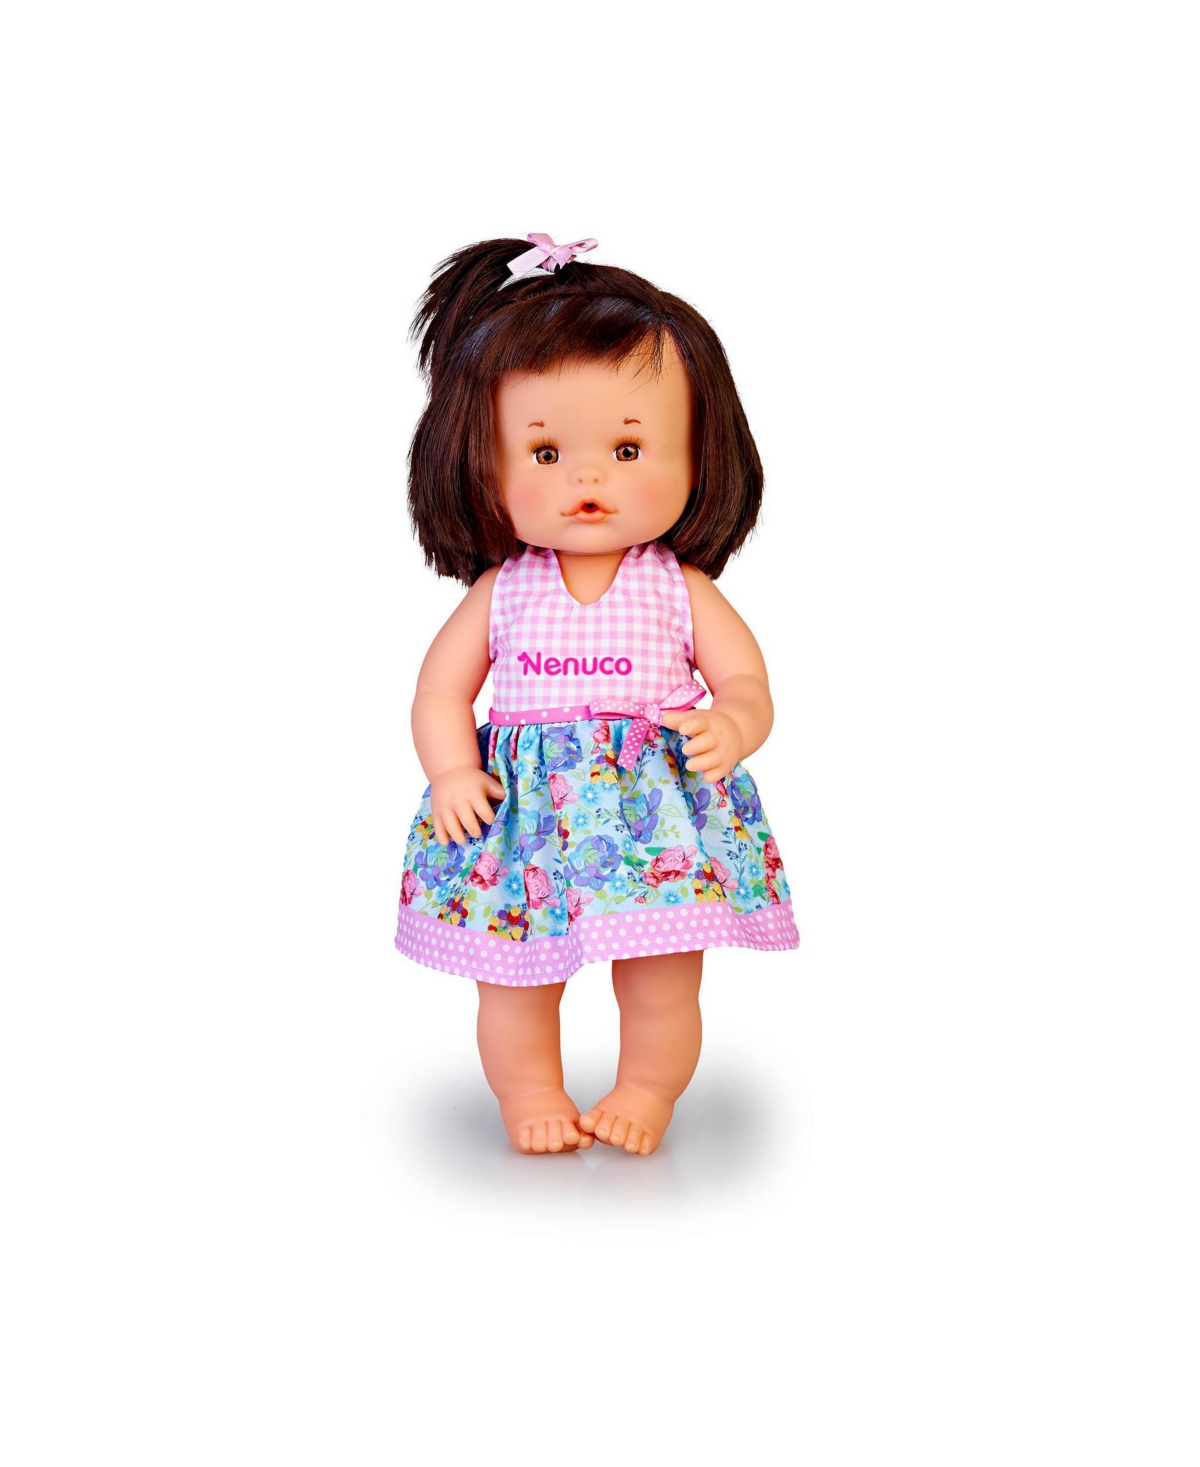 Nenuco S Of The World Latin Baby Doll, Ages 3 Plus For Pretend Play In Multicolor